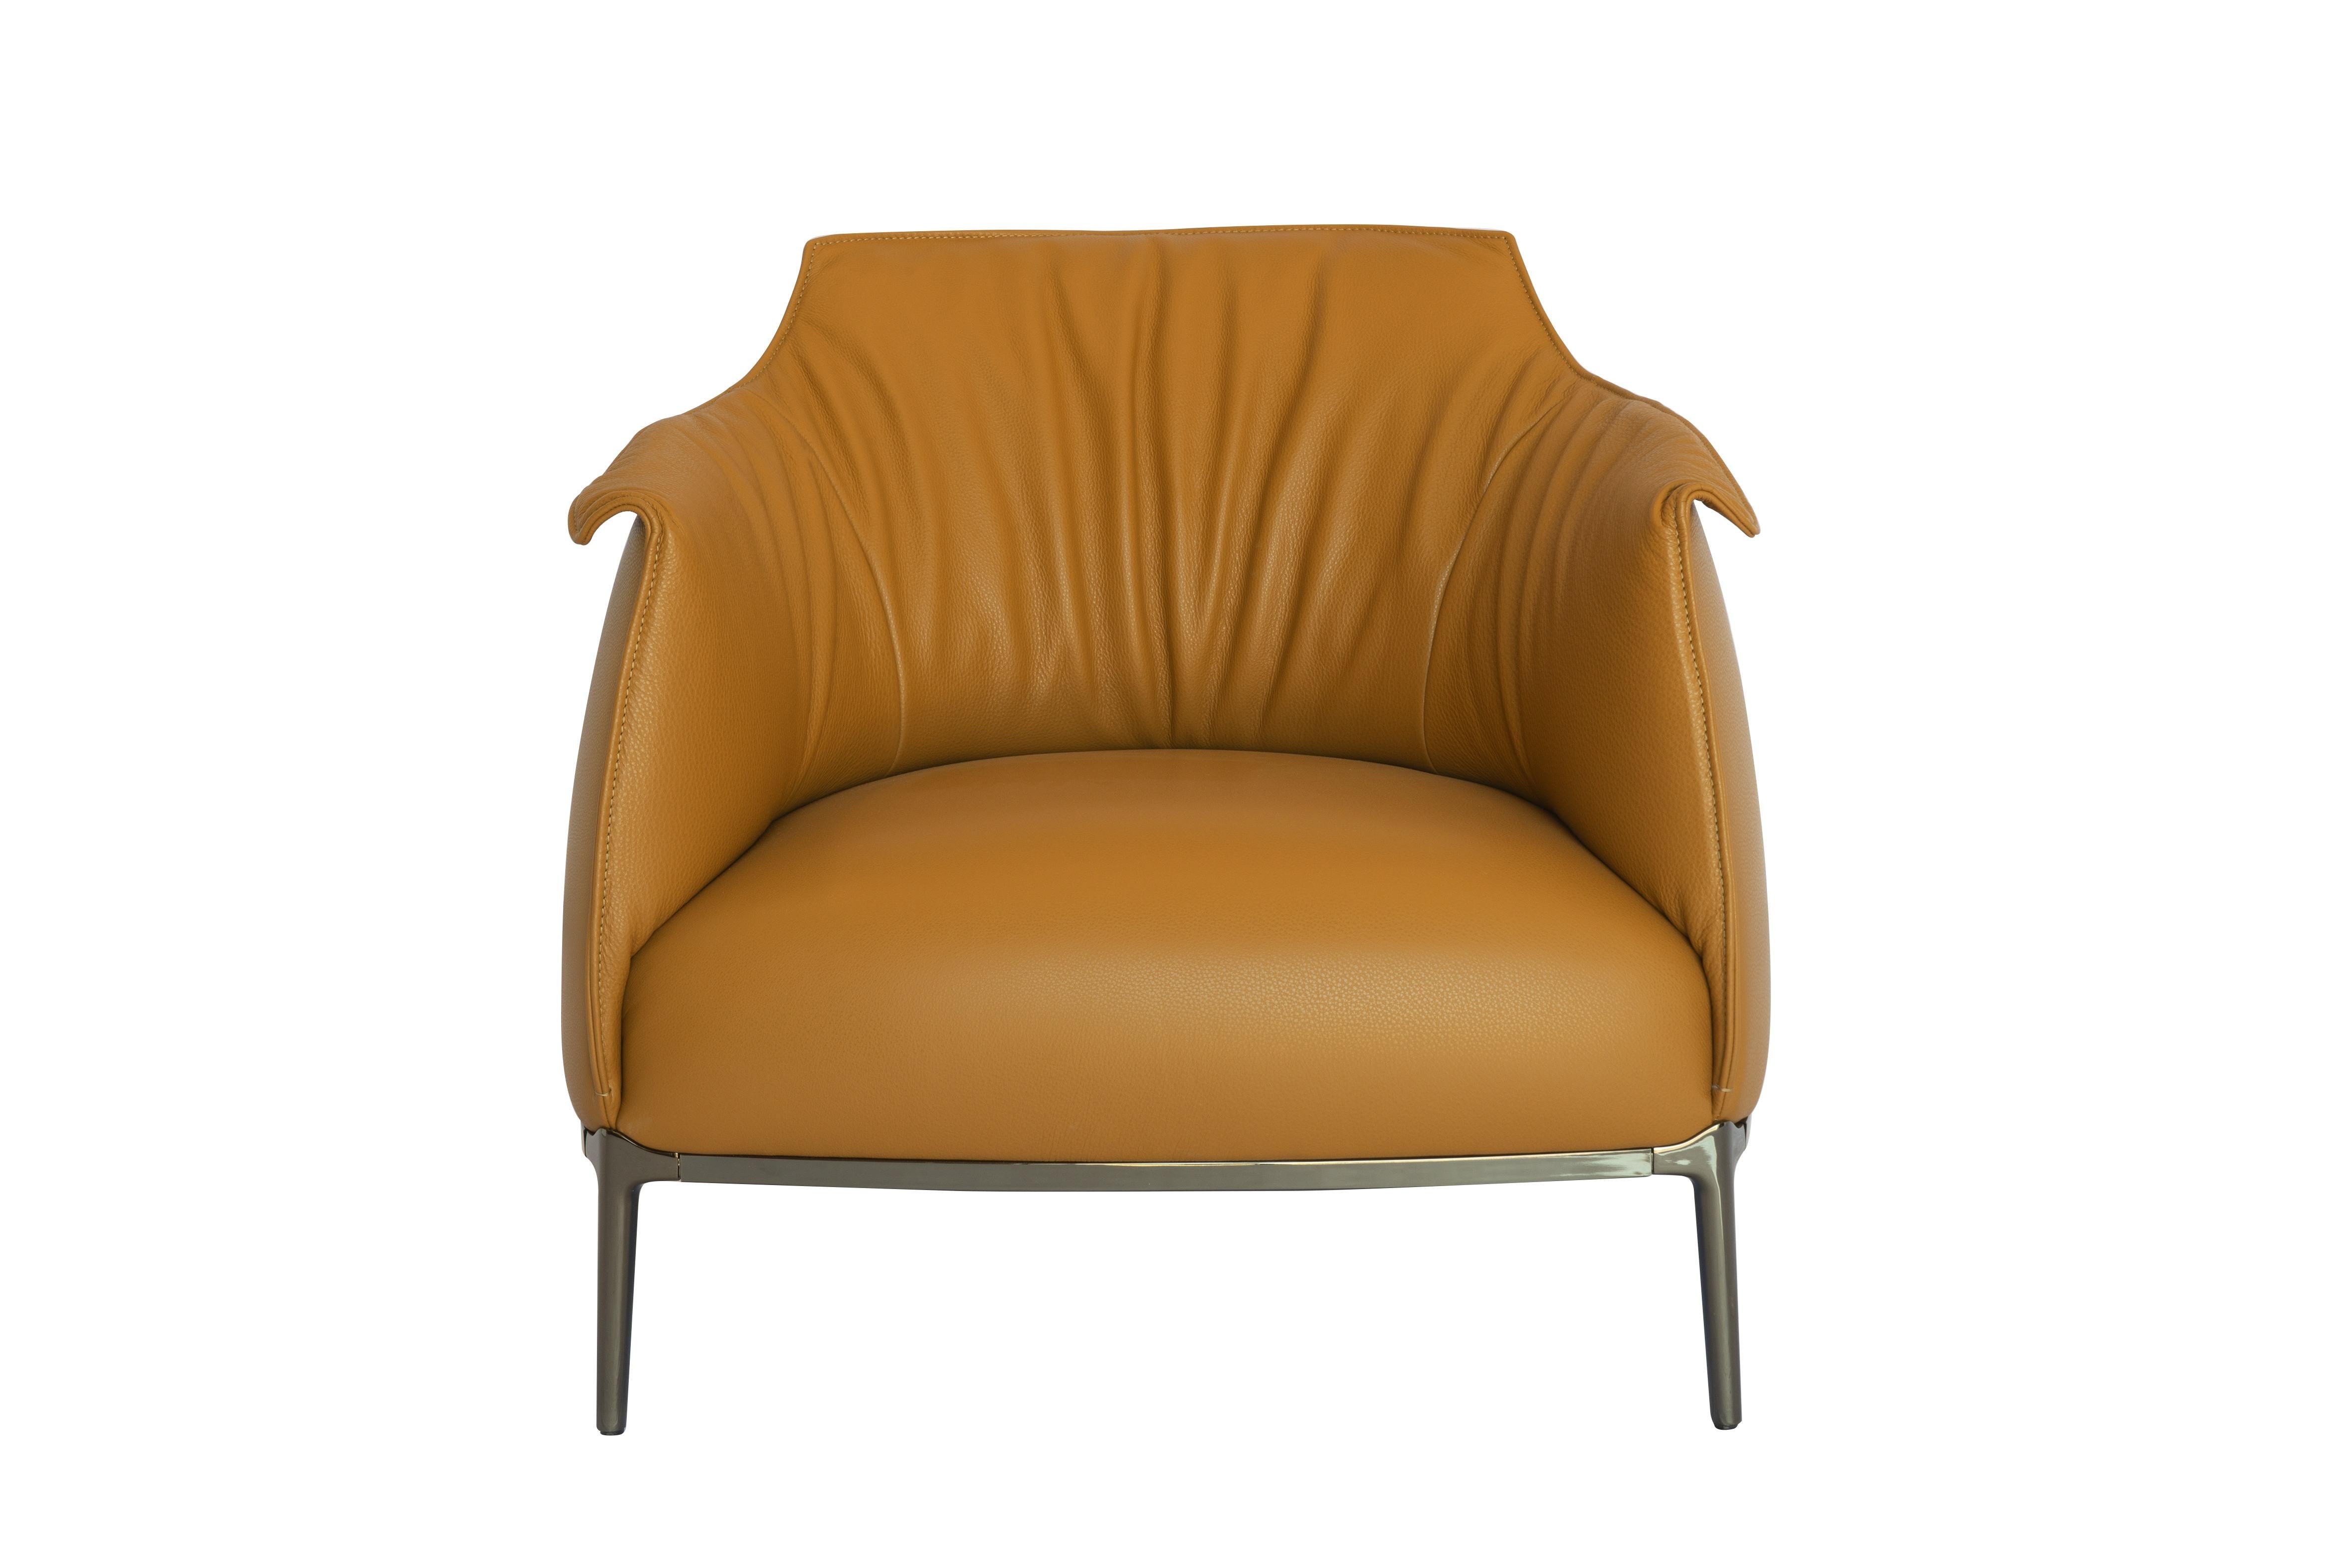 The Archibald by Jean-Marie Massaud is the perfect combination of substance and form, the armchairs and poufs boasting a comfortable and enveloping design ideal for meditation and relaxation. The breadth and depth of the seat are balanced by its